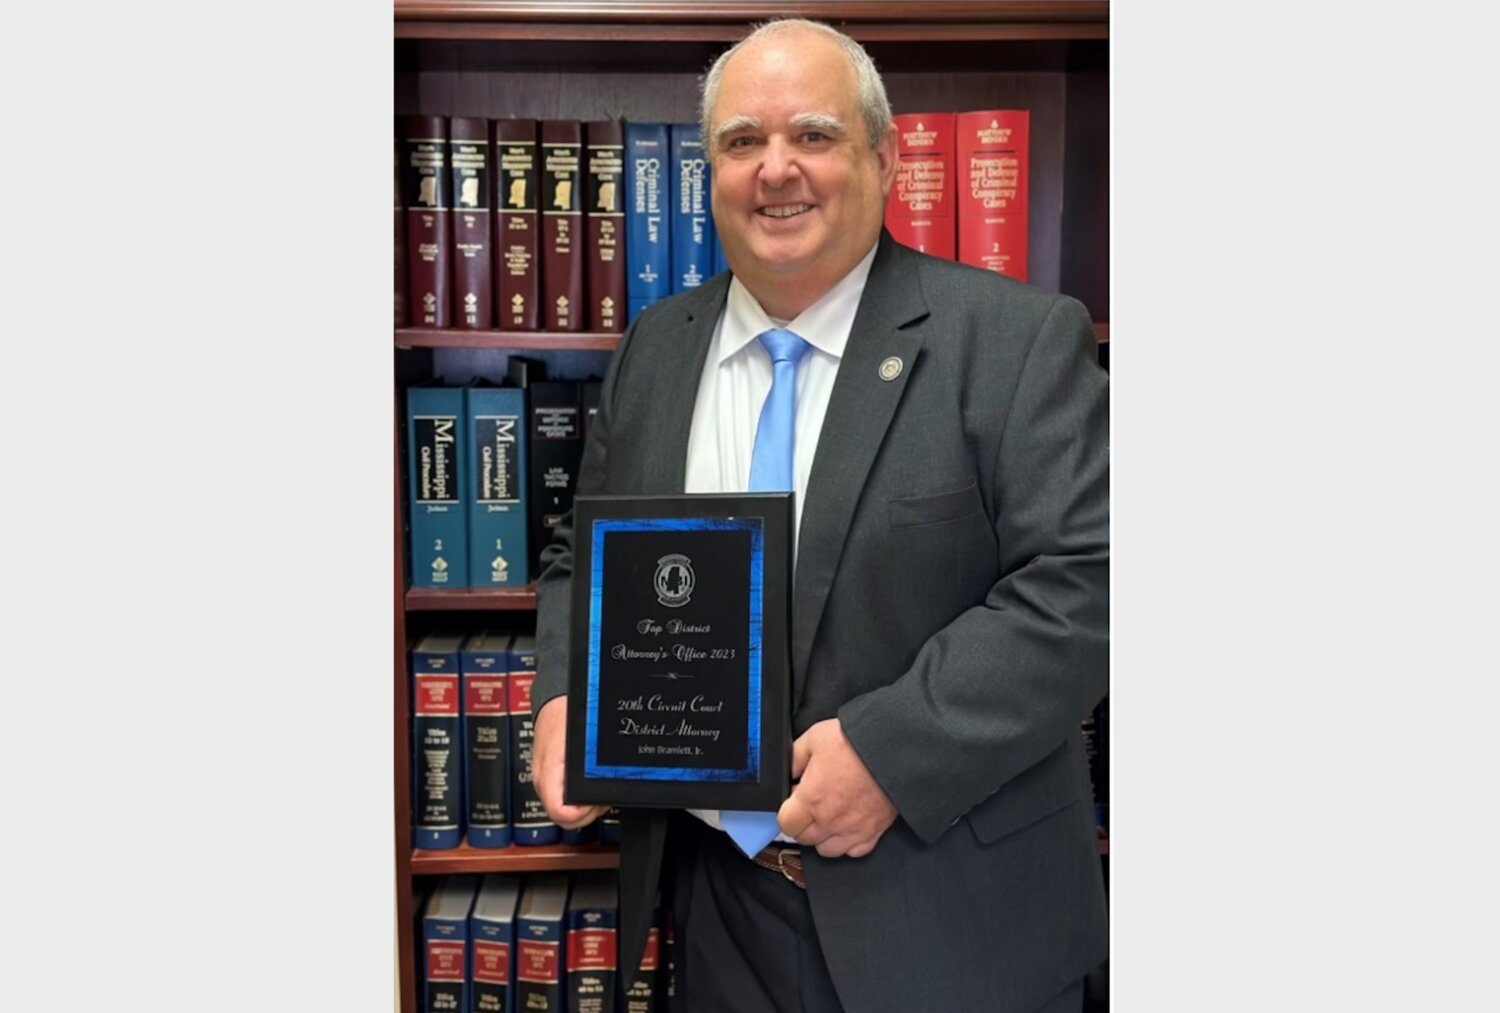 Pictured with the award is Bubba Bramlett, District Attorney for Madison and Rankin counties.